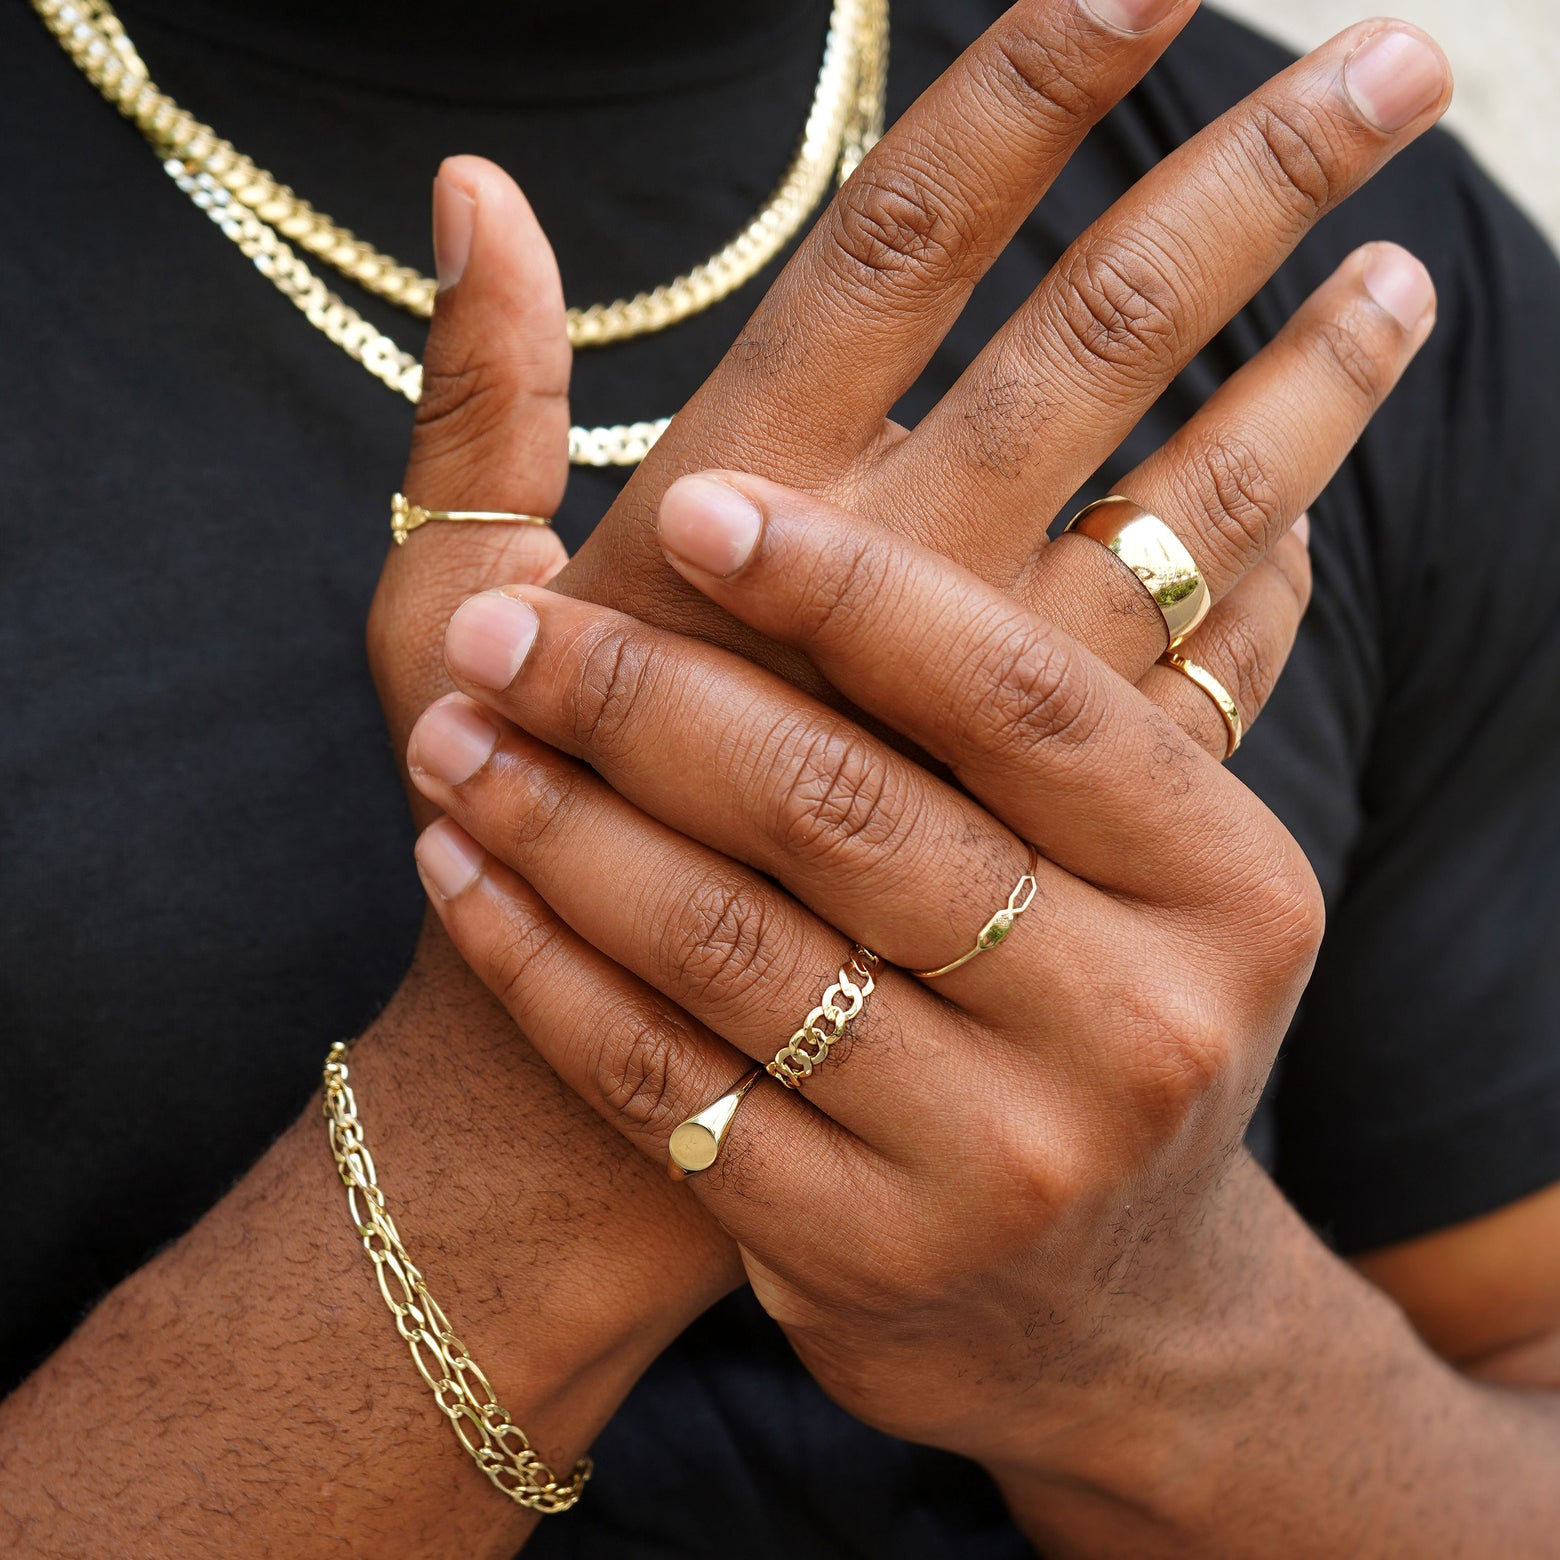 A model with gently grasping their own palm wearing Automic Gold rings and chains